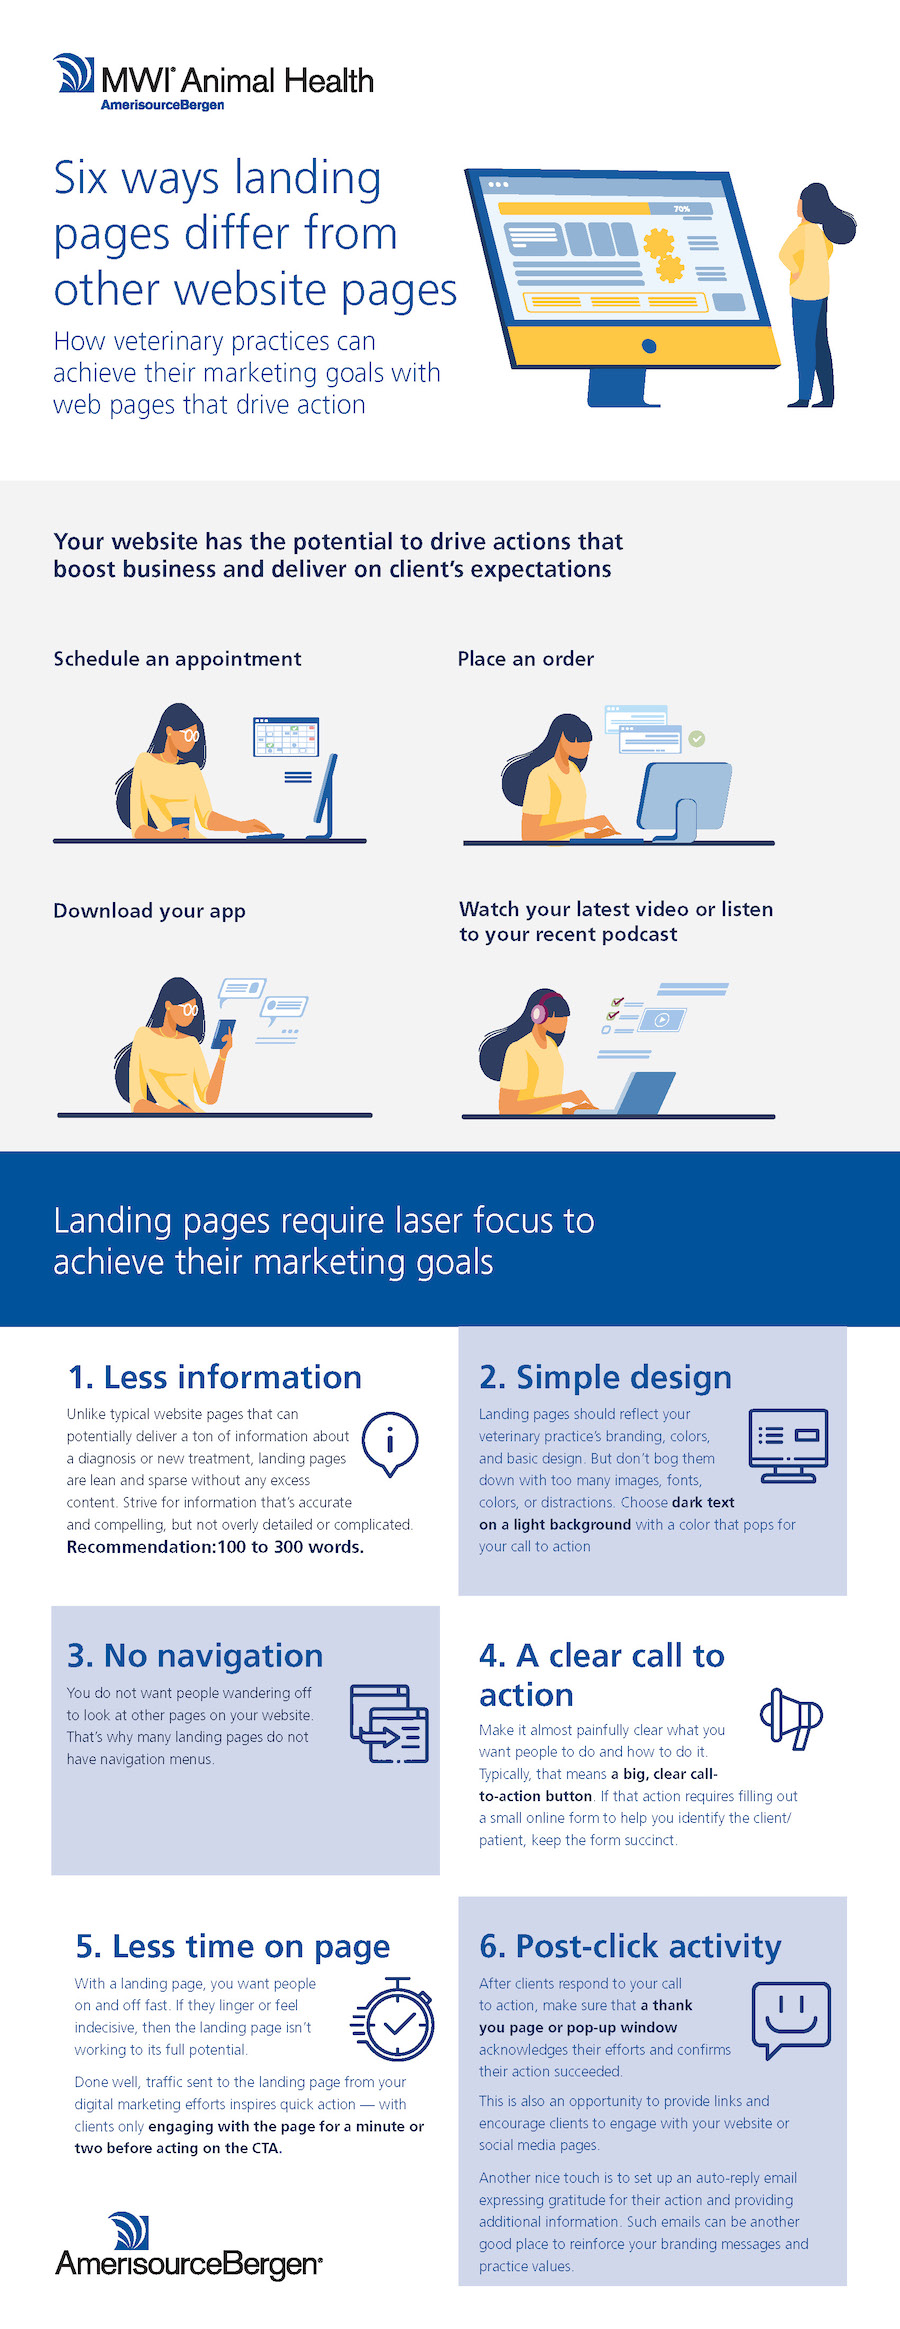 An infographic showing six ways landing pages are different from general web pages